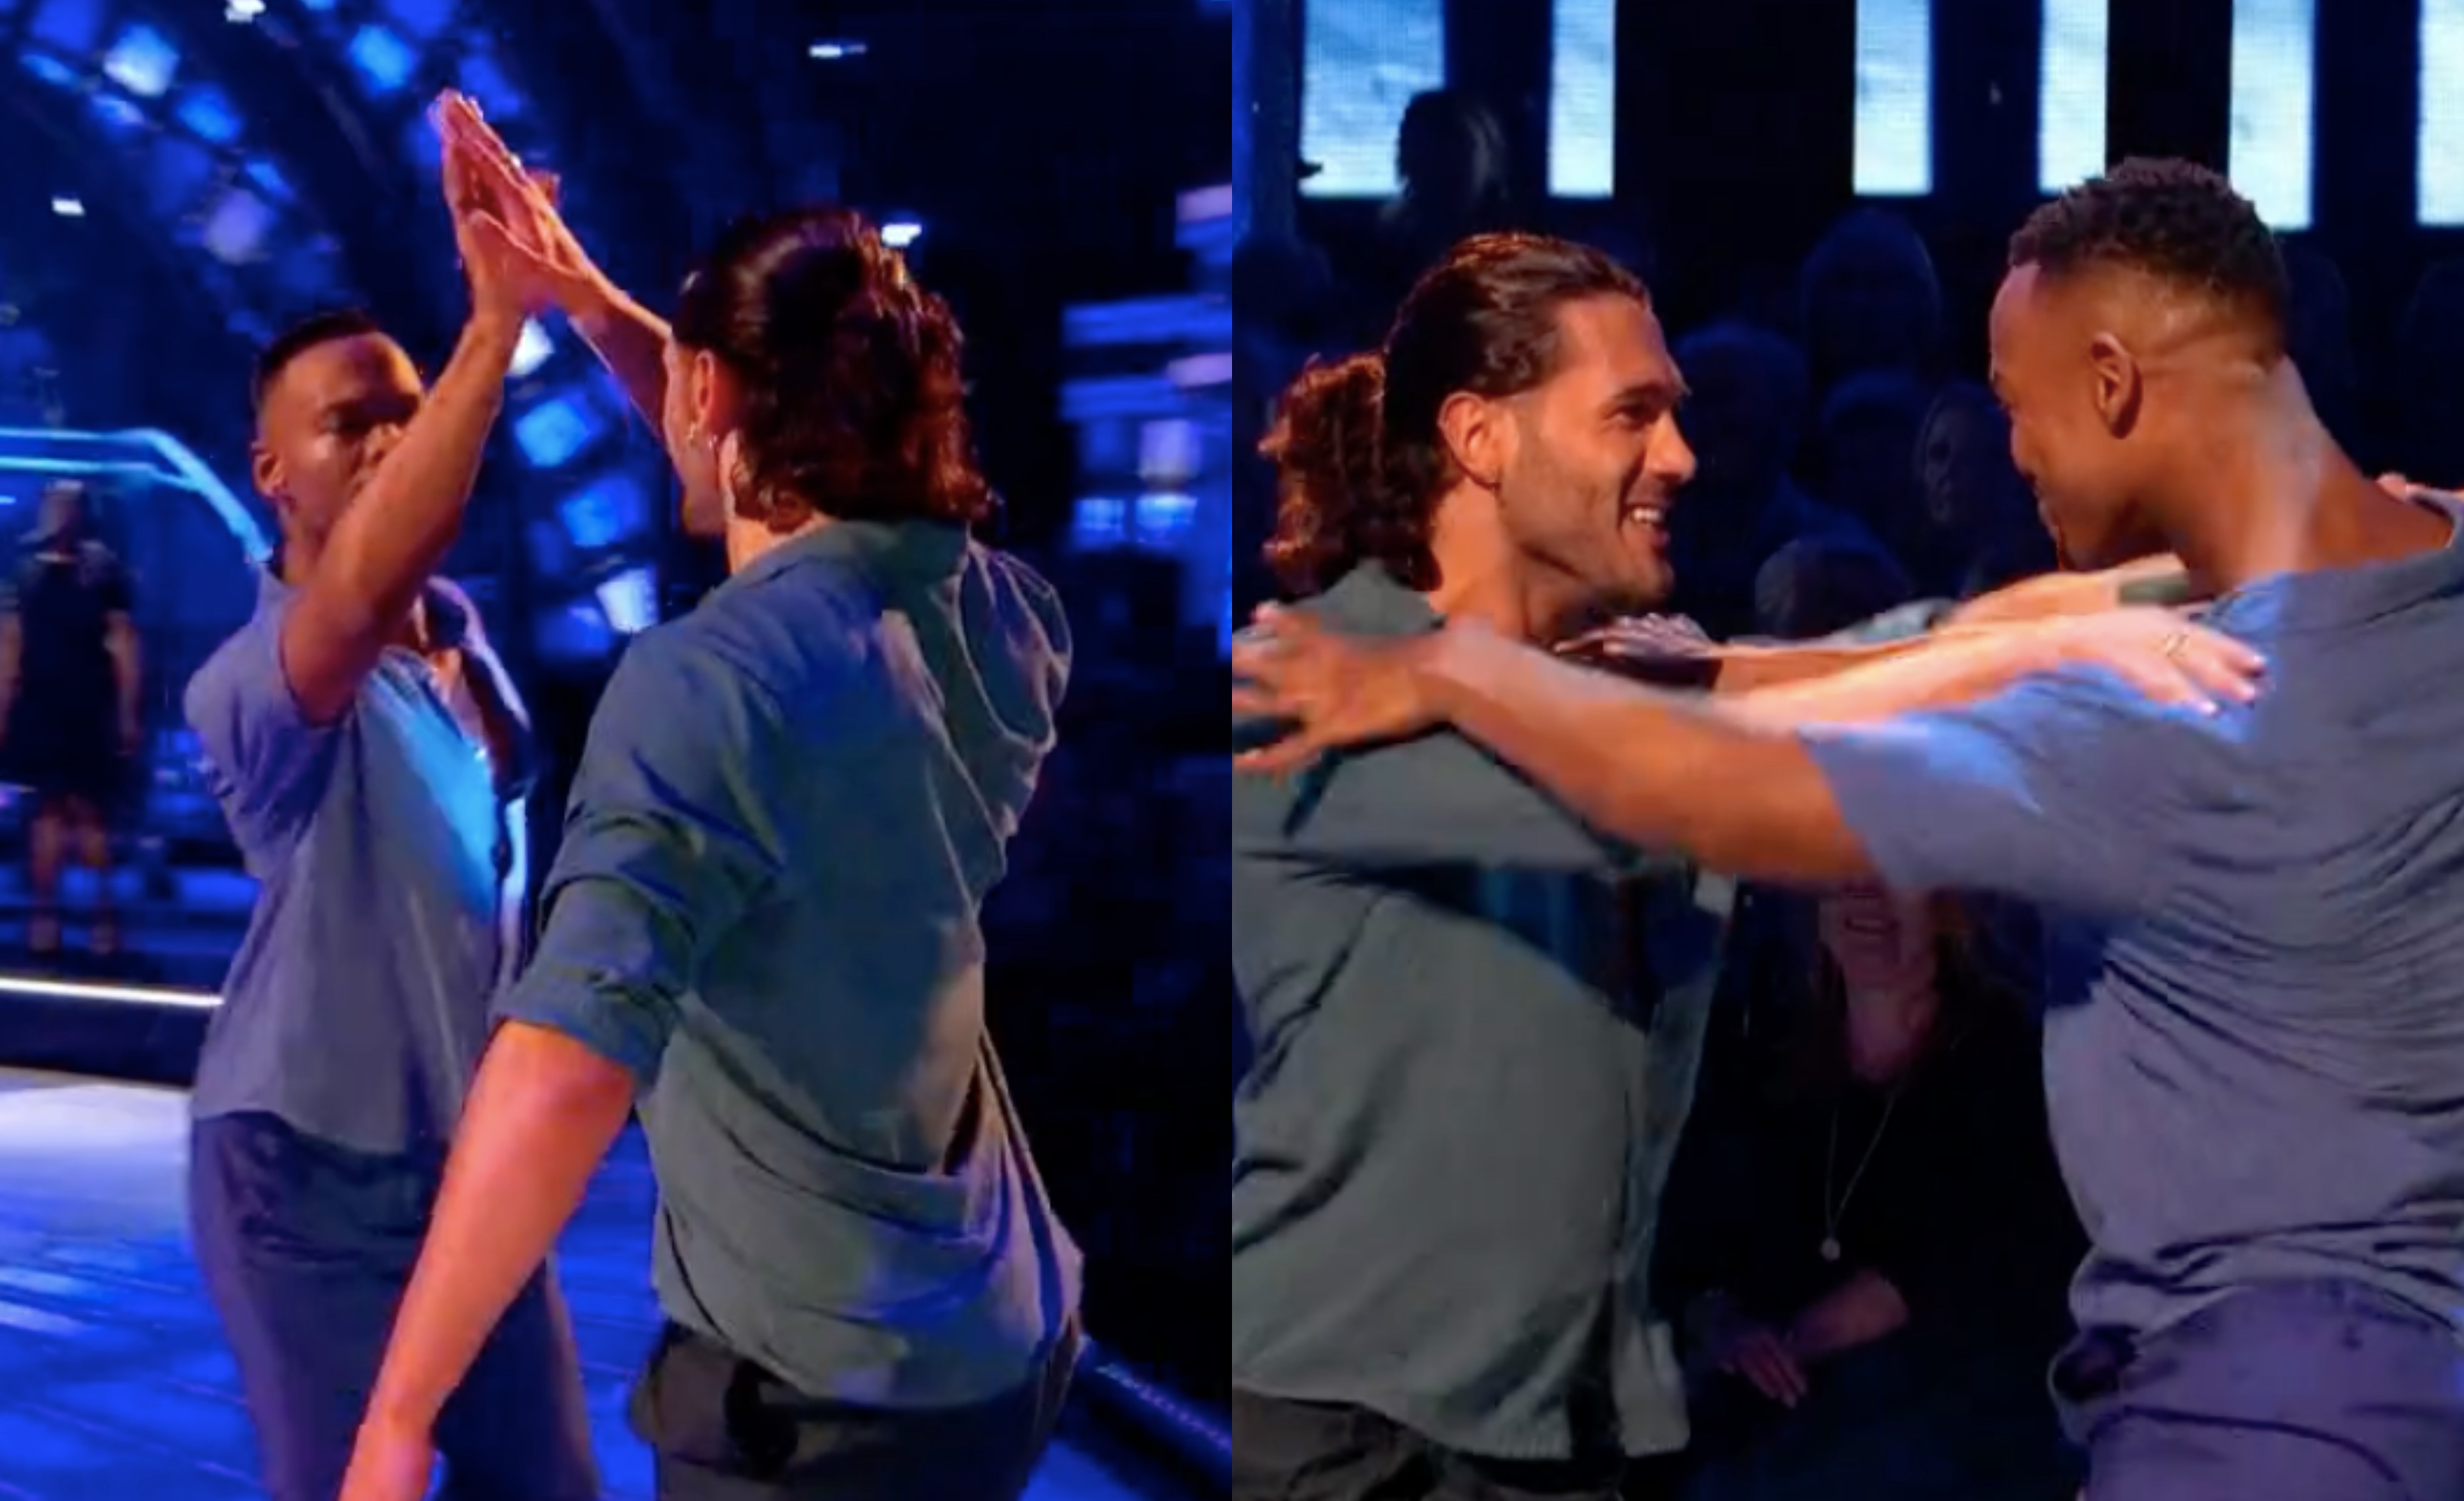 Johannes Radebe (L) and Graziano di Prim became the first same-sex duo to dance on Strictly Come Dancing. (Screenshot via Twitter)